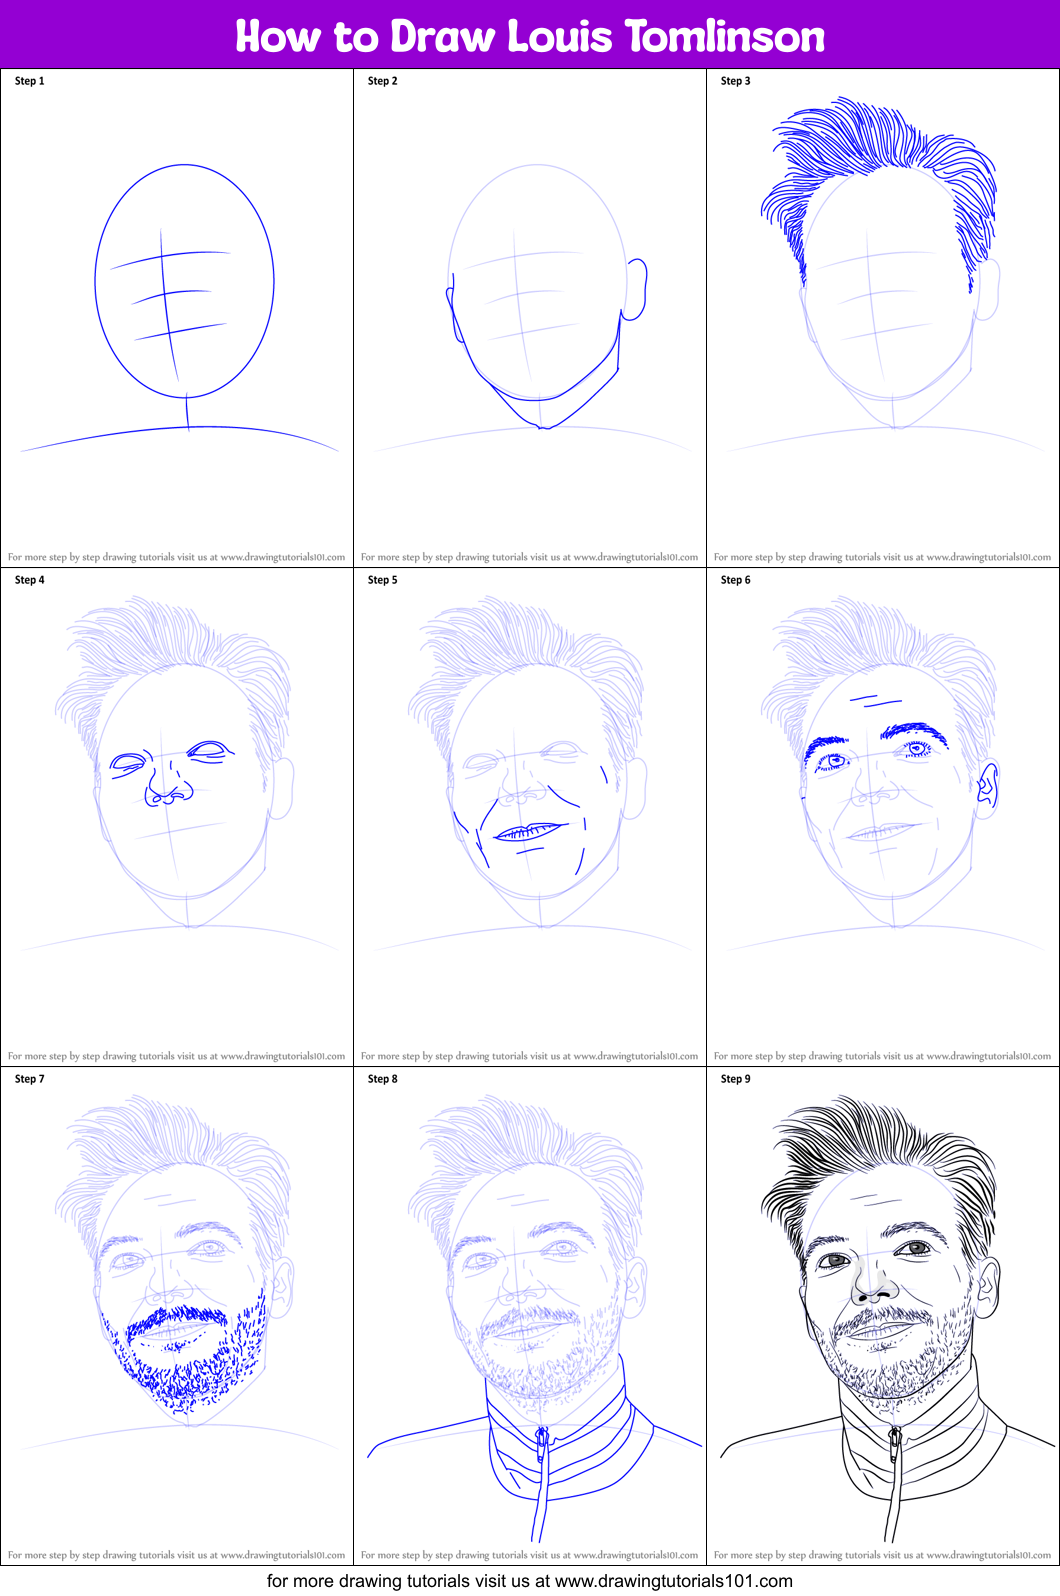 How to Draw Louis Tomlinson printable step by step drawing sheet